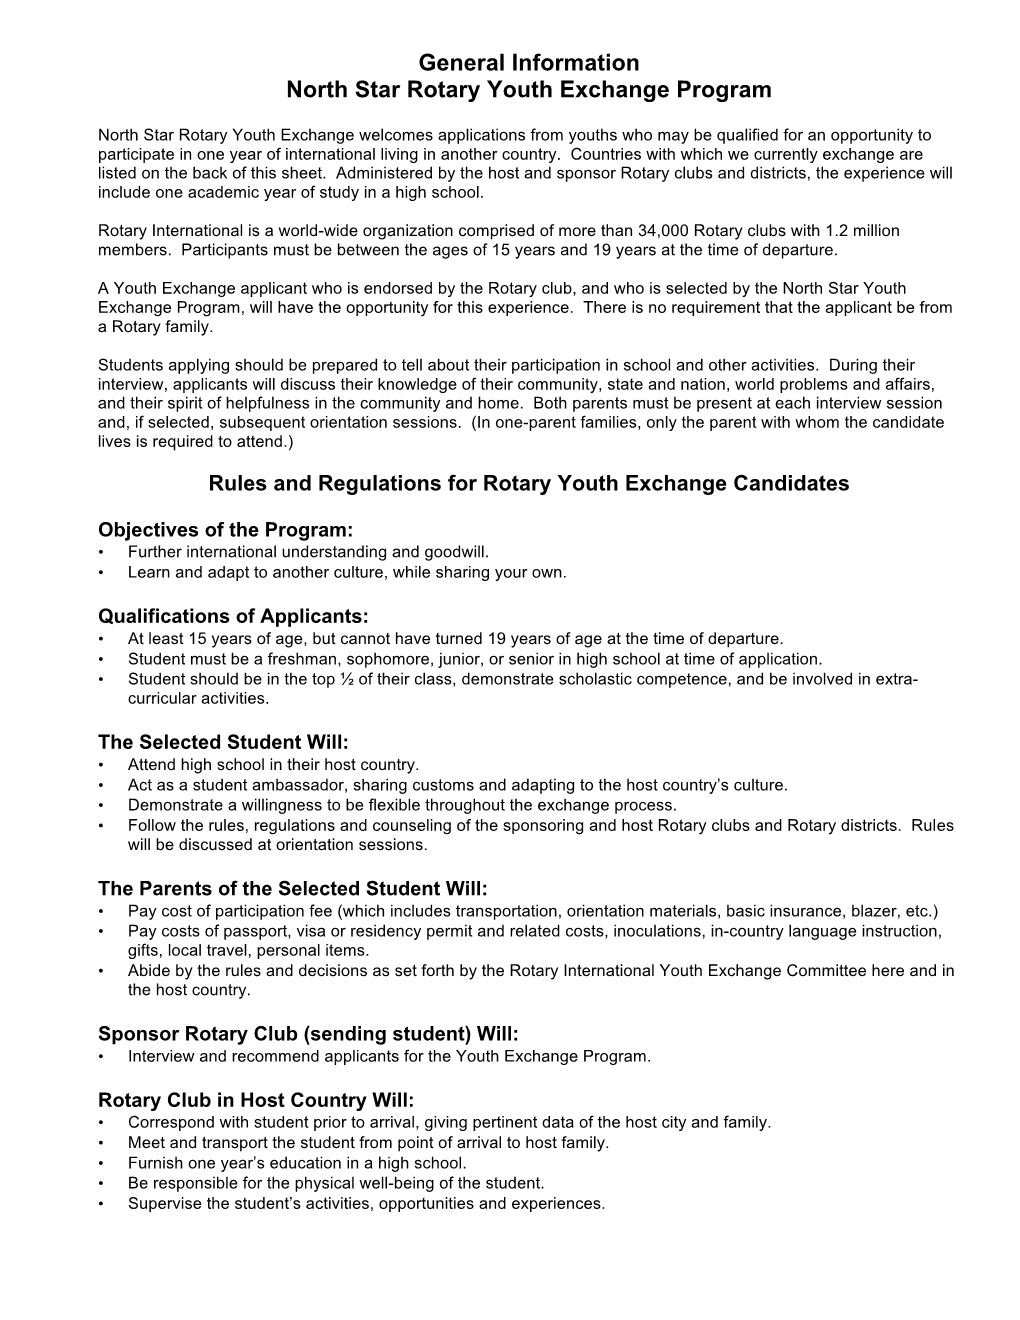 General Information North Star Rotary Youth Exchange Program